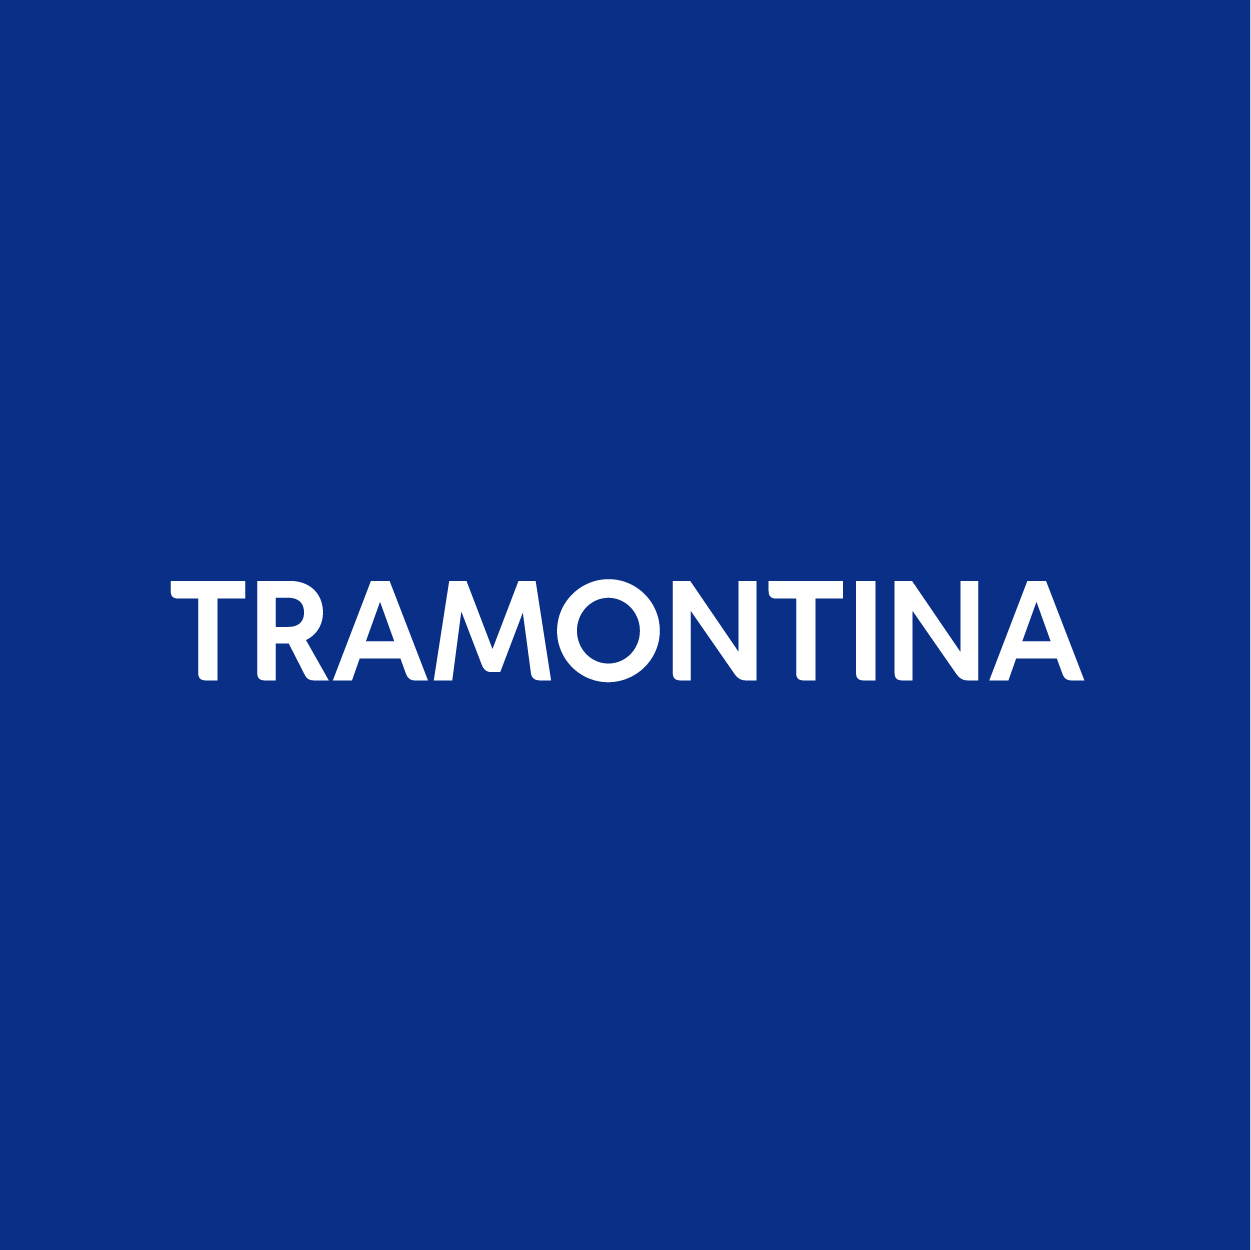 TRAMONTINA OFFICIAL STORE